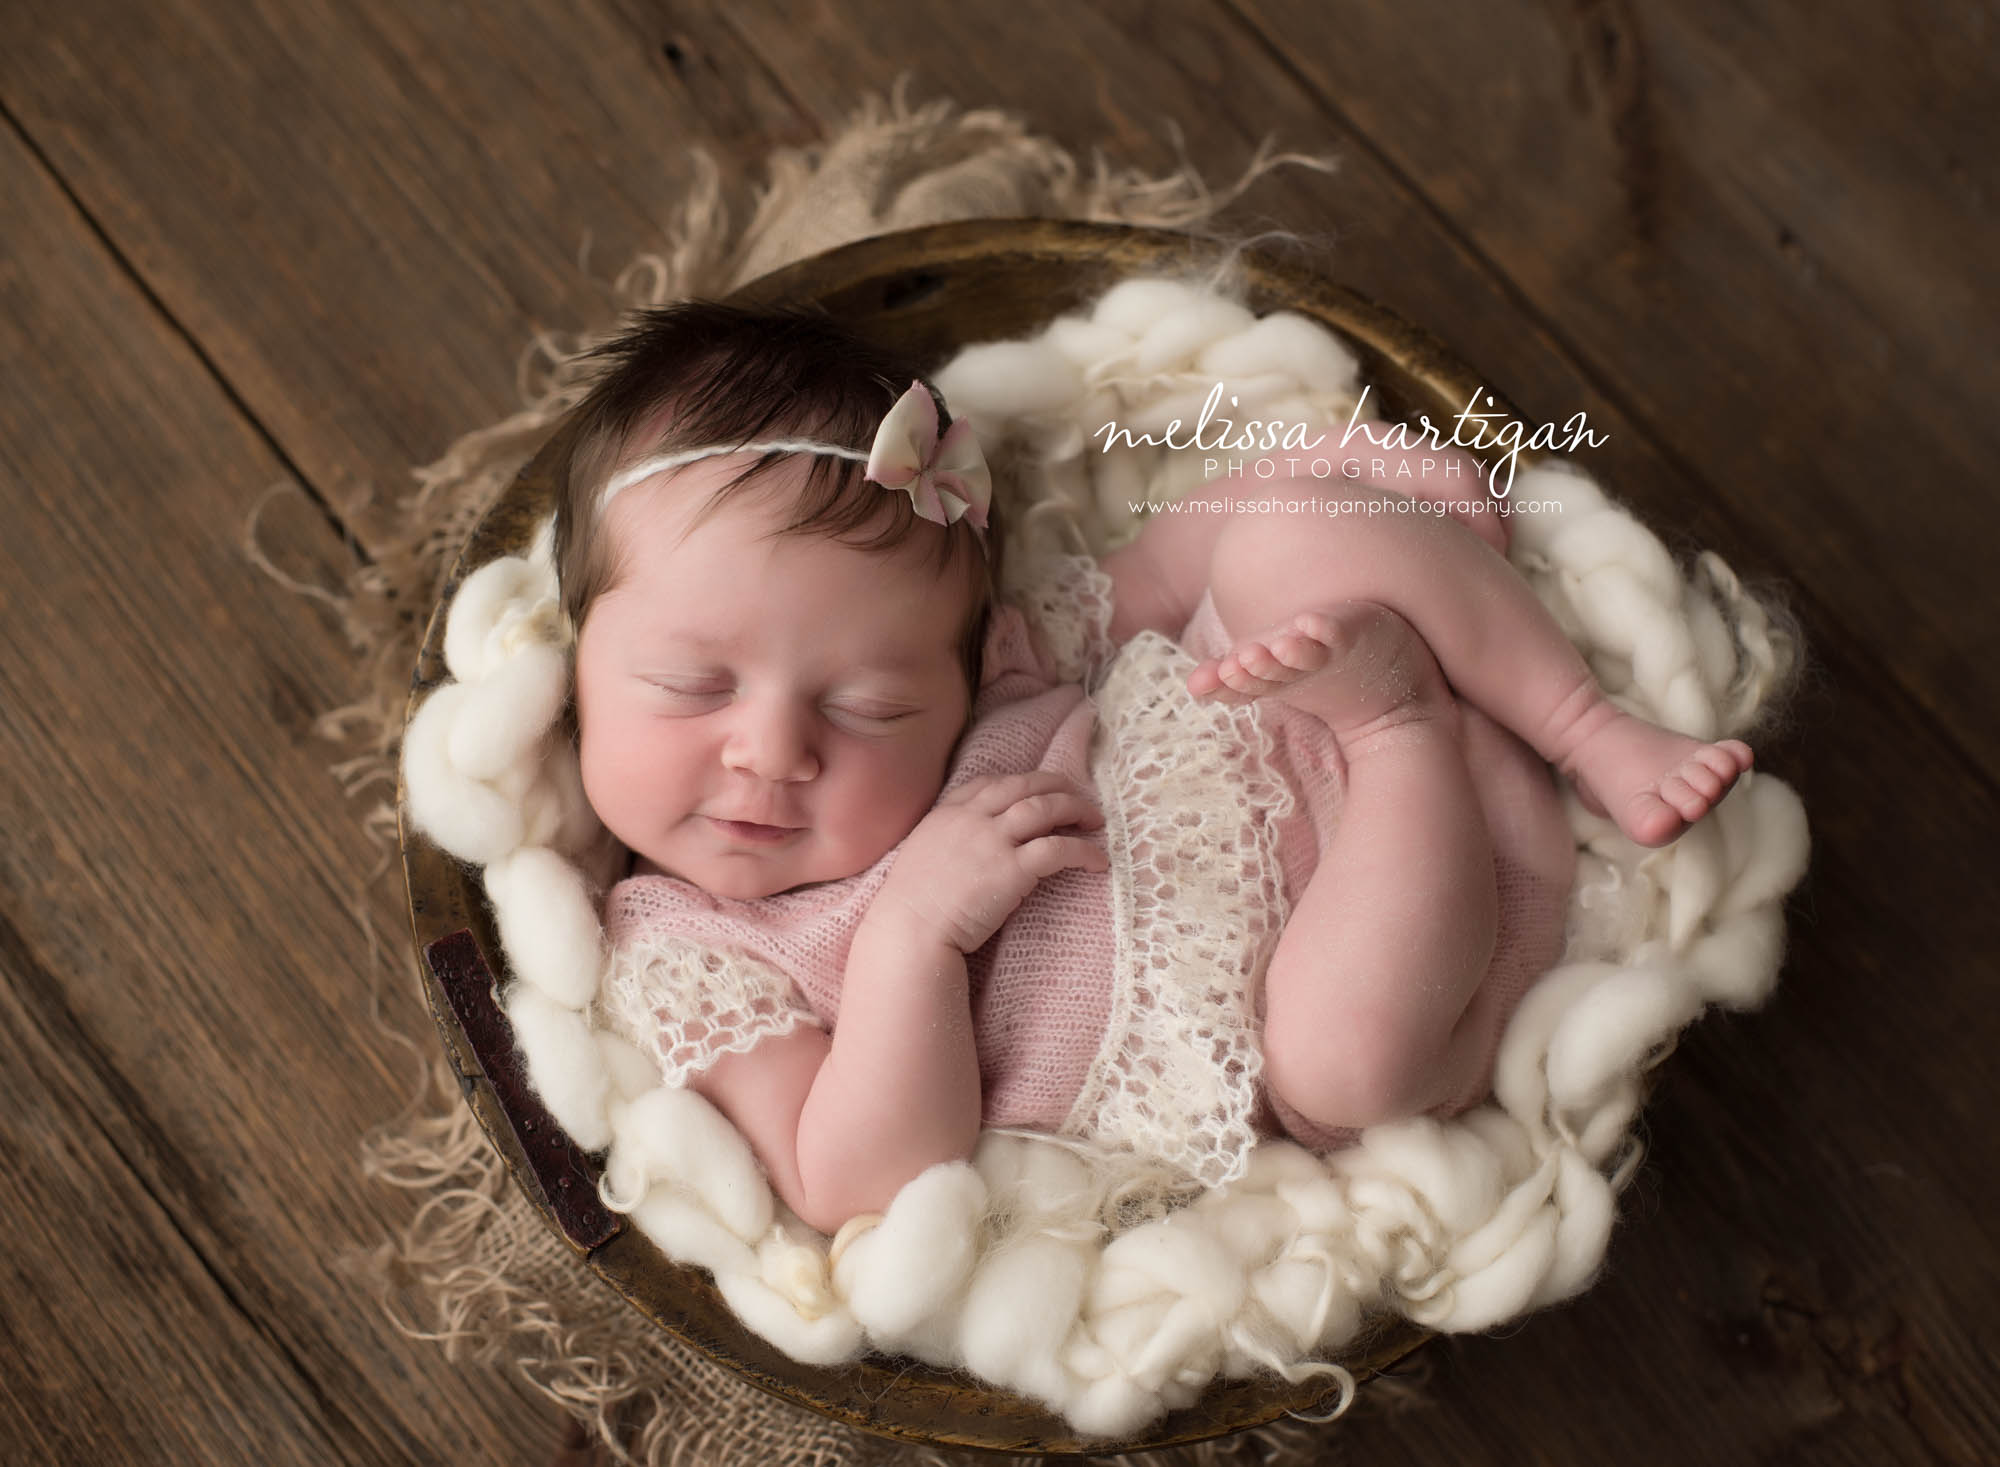 Melissa Hartigan Photography Connecticut Newborn Photographer Coventry Ct Middlefield CT baby Fairfield county Newborn and maternity CT photographer Baby girl in wooden bucket wearing pink knit outfit and headband on top of white chunky knit blanket